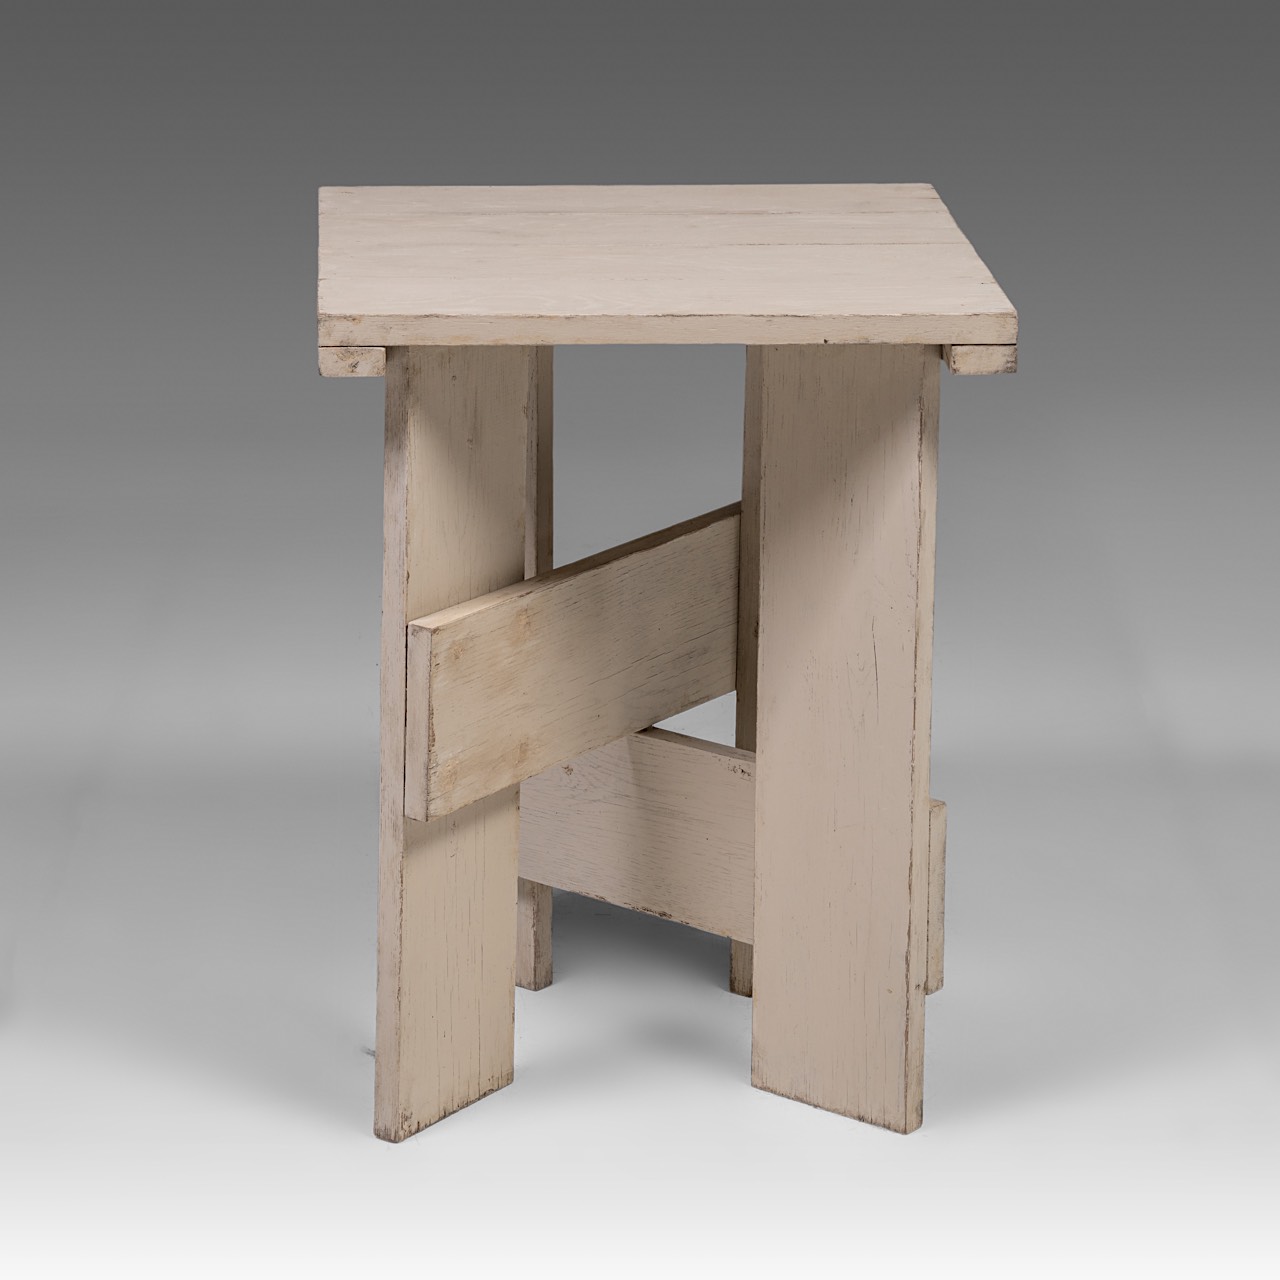 A decorative Low crate table after Gerrit Rietveld, H 63 - W 49 - D 47 cm - Image 5 of 7